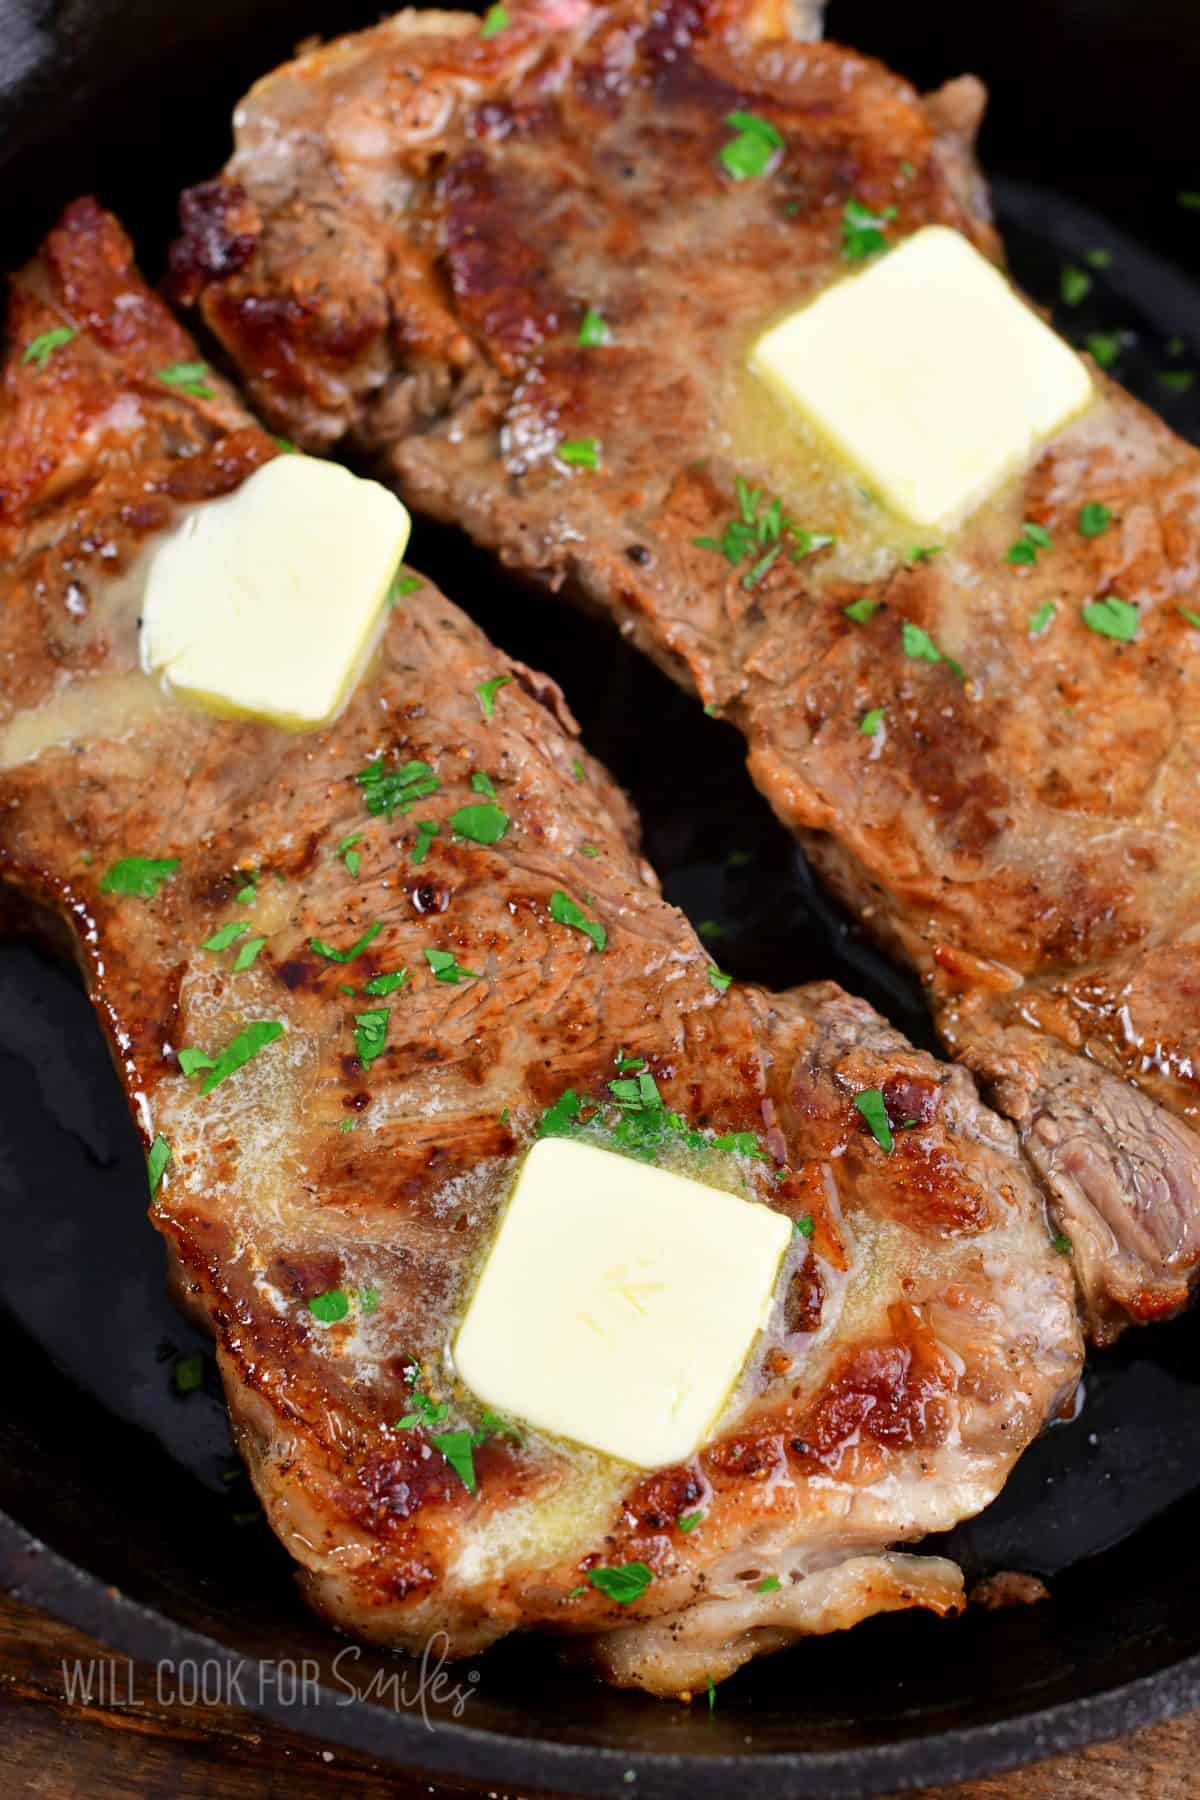 https://www.willcookforsmiles.com/wp-content/uploads/2023/03/How-To-Cook-Steak-In-The-Oven-closeup.jpg